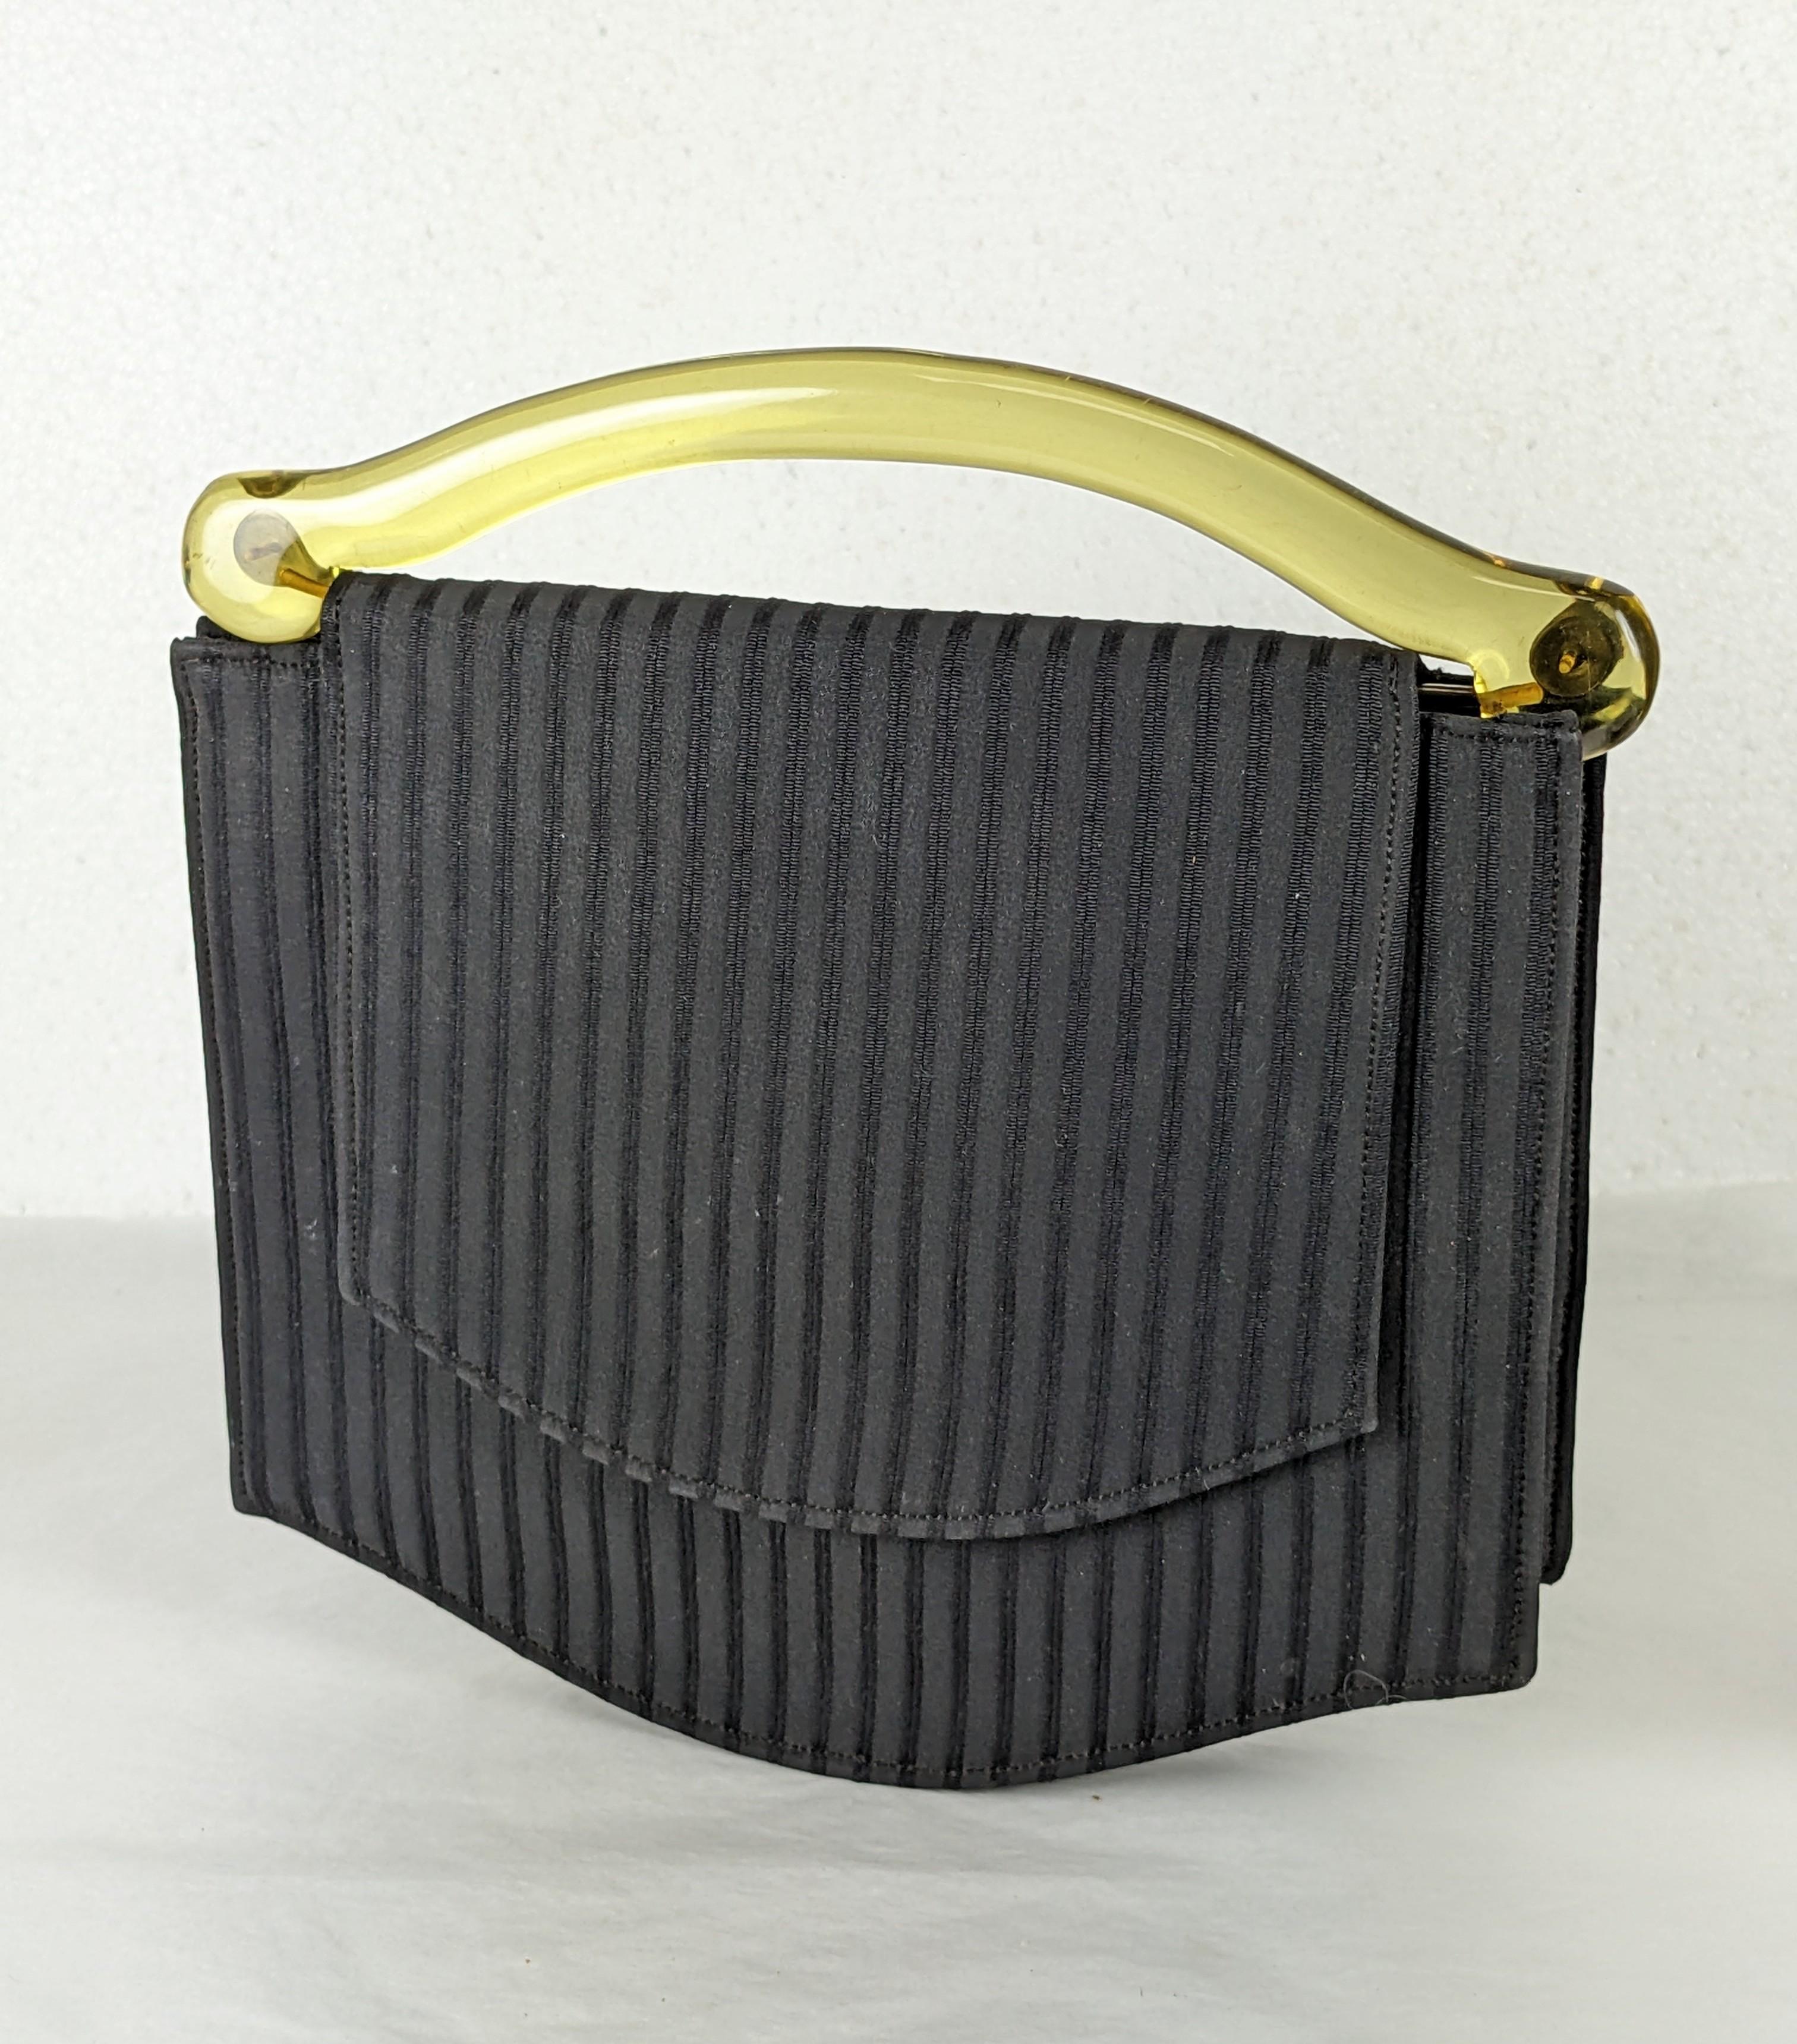 Charming Art Deco Bakelite Bag in a black ribbed cotton rayon blend. An applejuice hand carved bakelite handle is used and a snap closure keeps flap in place. 2 inside pockets and mirror. 8